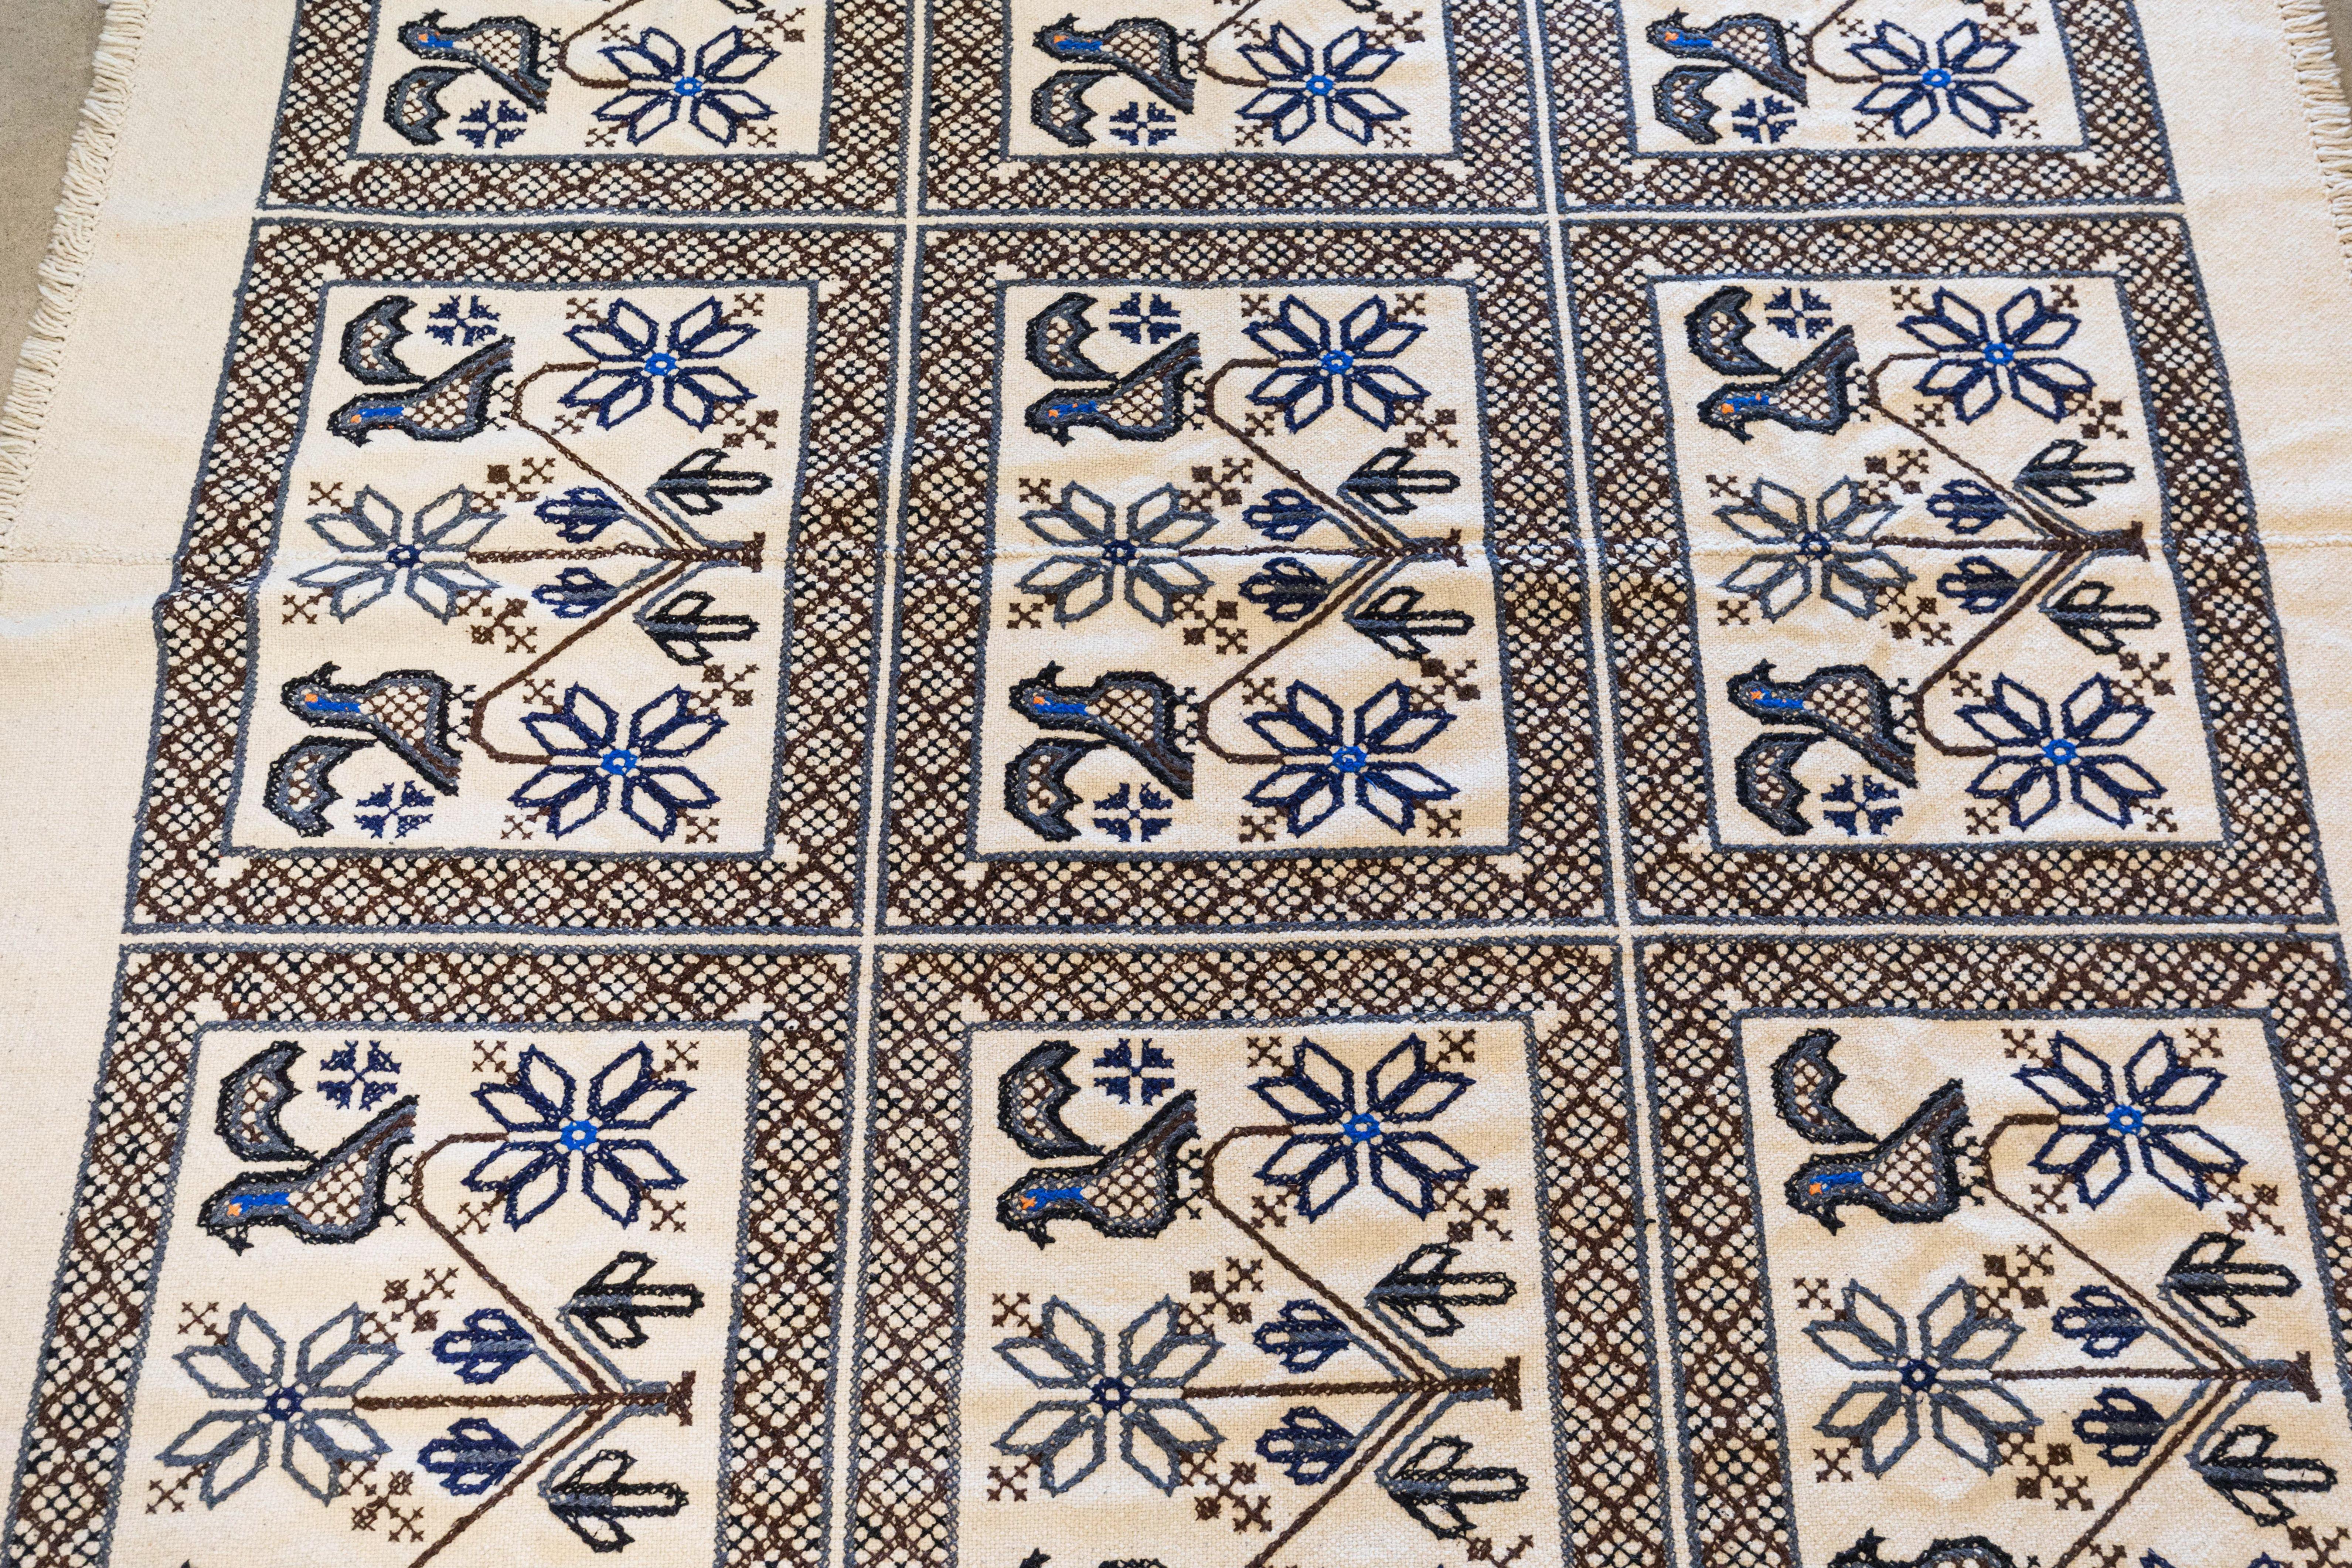 This large midcentury Mexican folk textile with handstitched embroidery would make a good floor covering, lightweight rug, bed cover, or wall hanging. Woven in cream wool, it features birds and a geometric design in black, blue, brown, and grey